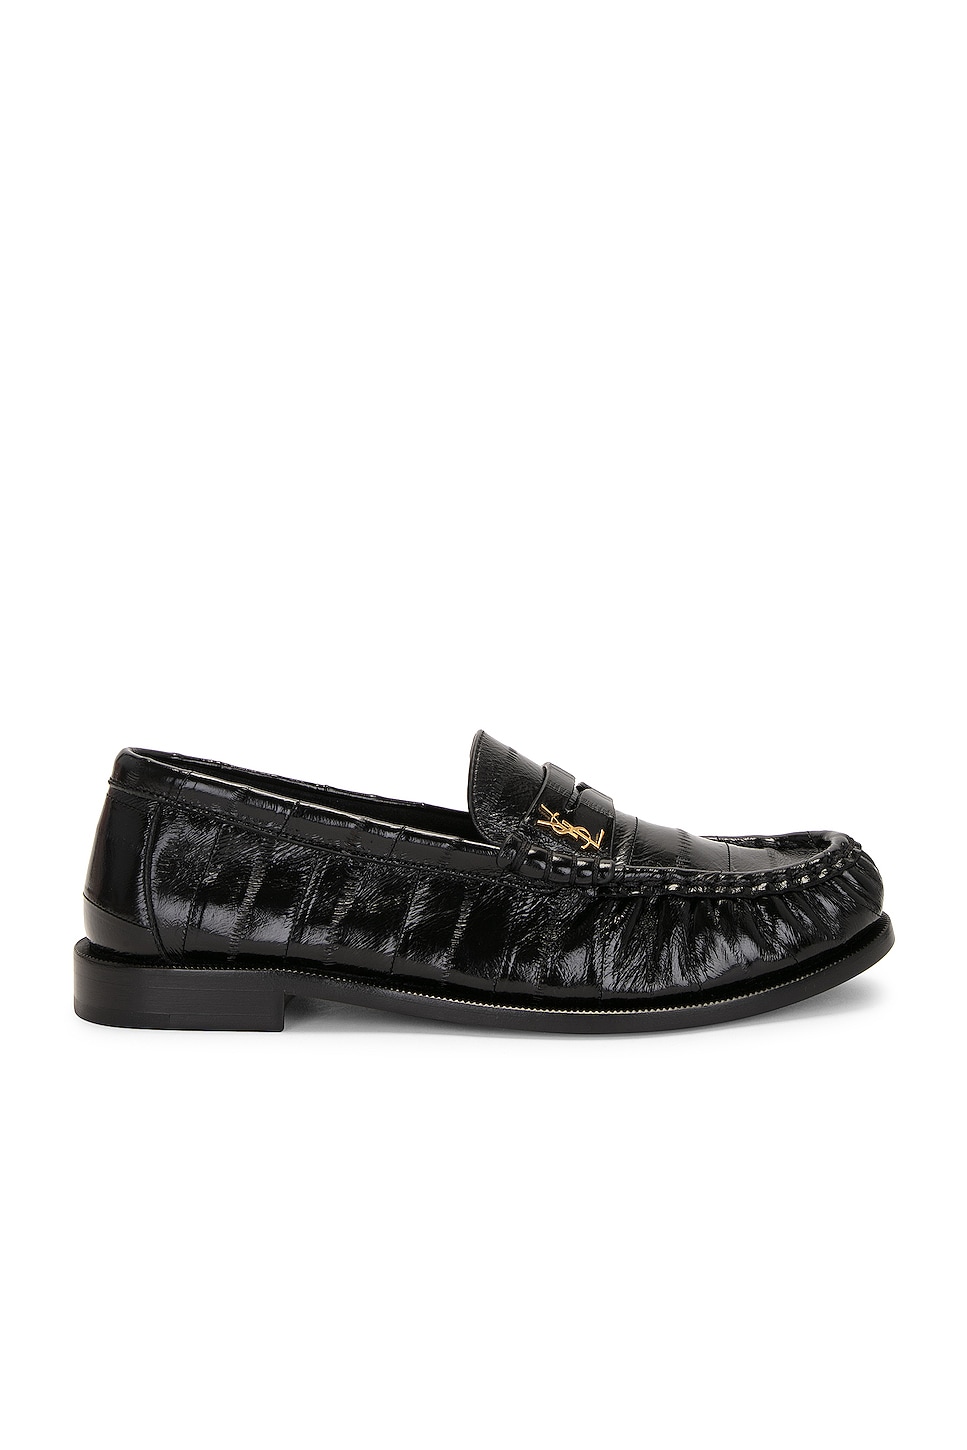 Image 1 of Saint Laurent Le 15 Loafer in Nero